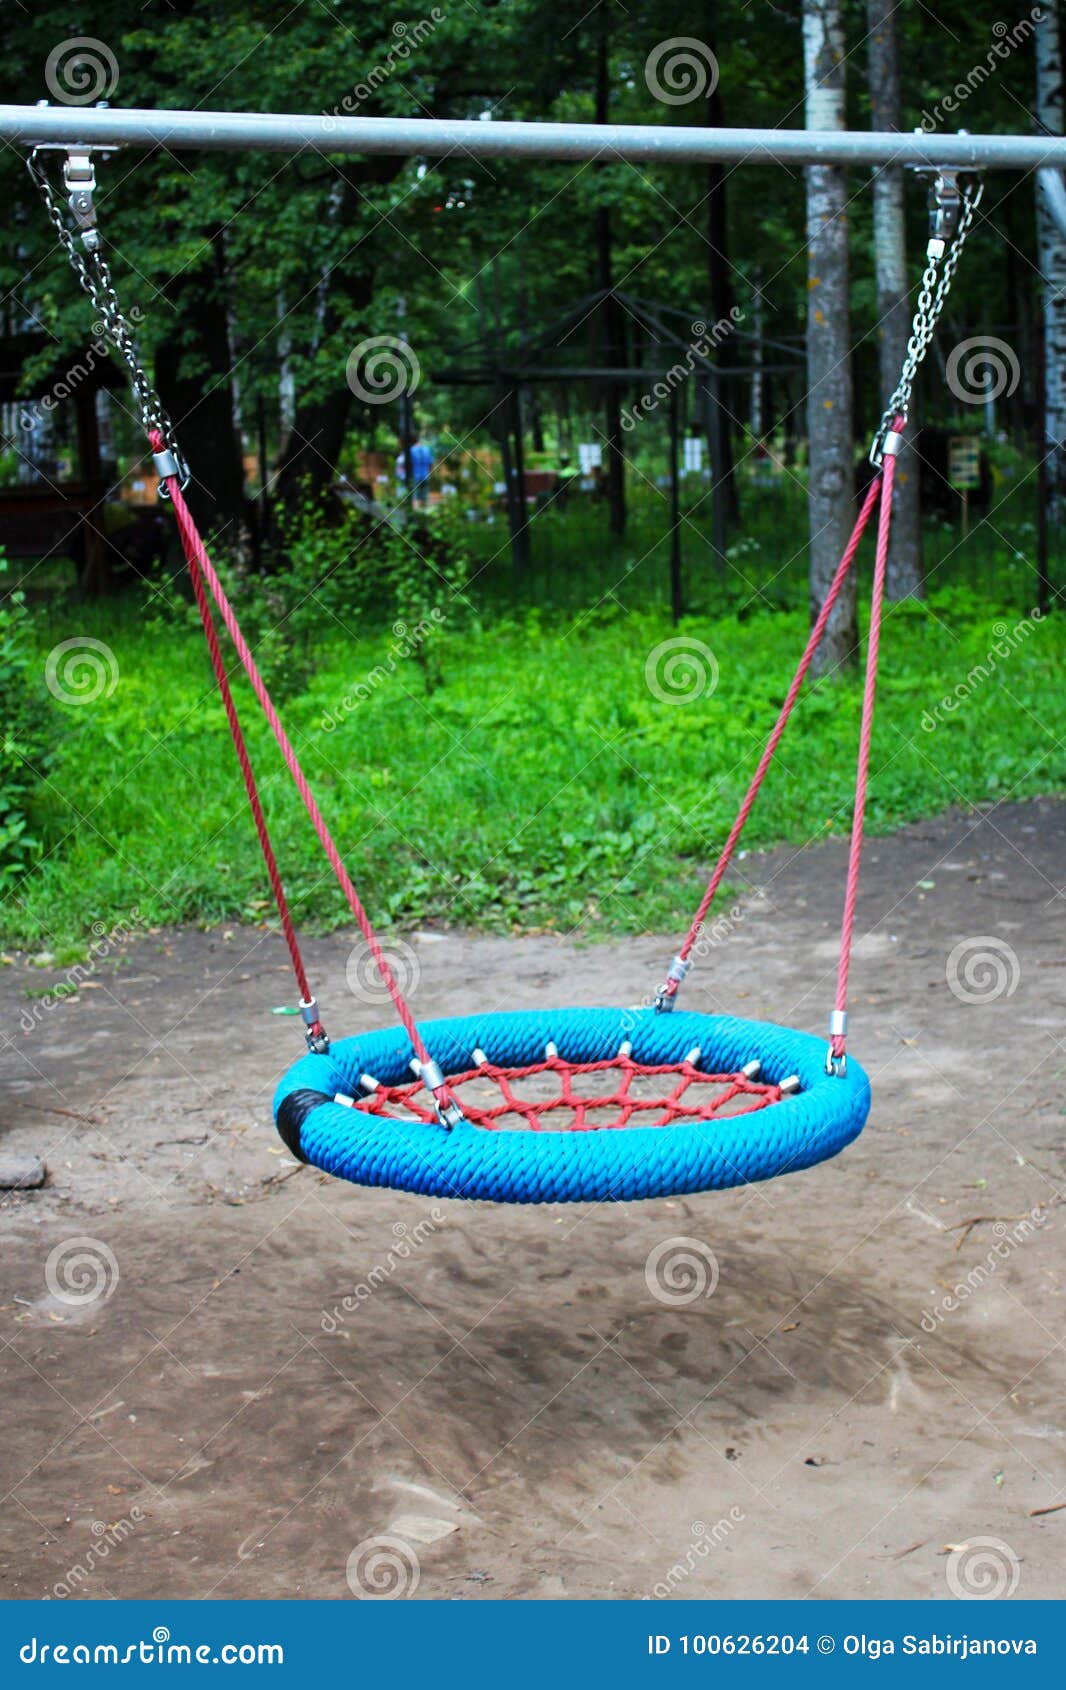 Wicker Round Swing in the Park, Handmade Stock Photo - Image of little,  childhood: 100626204